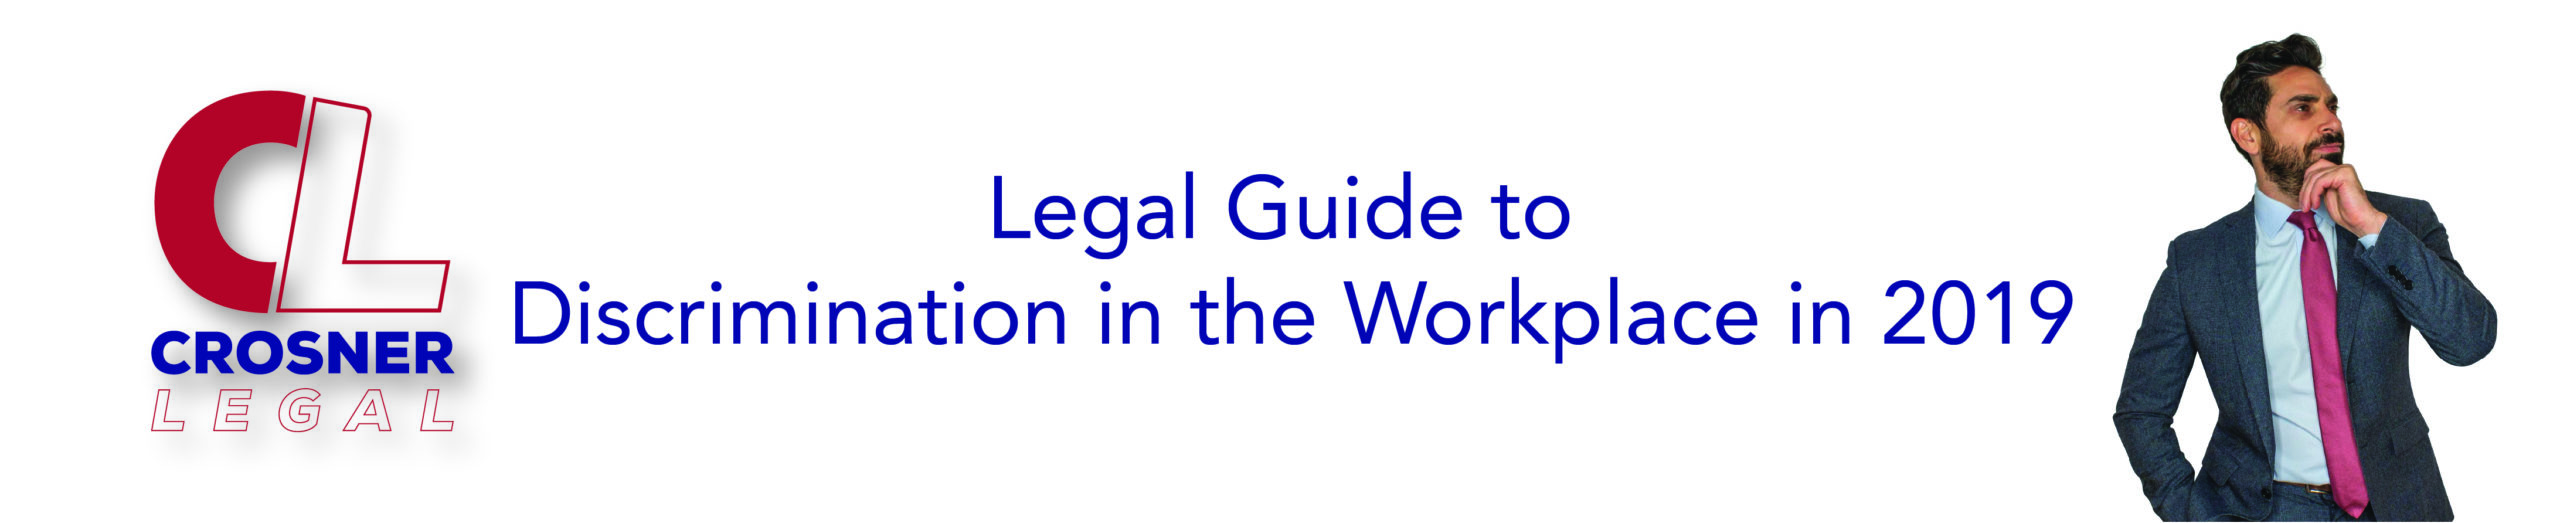 Legal Guide to Discrimination in the Workplace in 2019